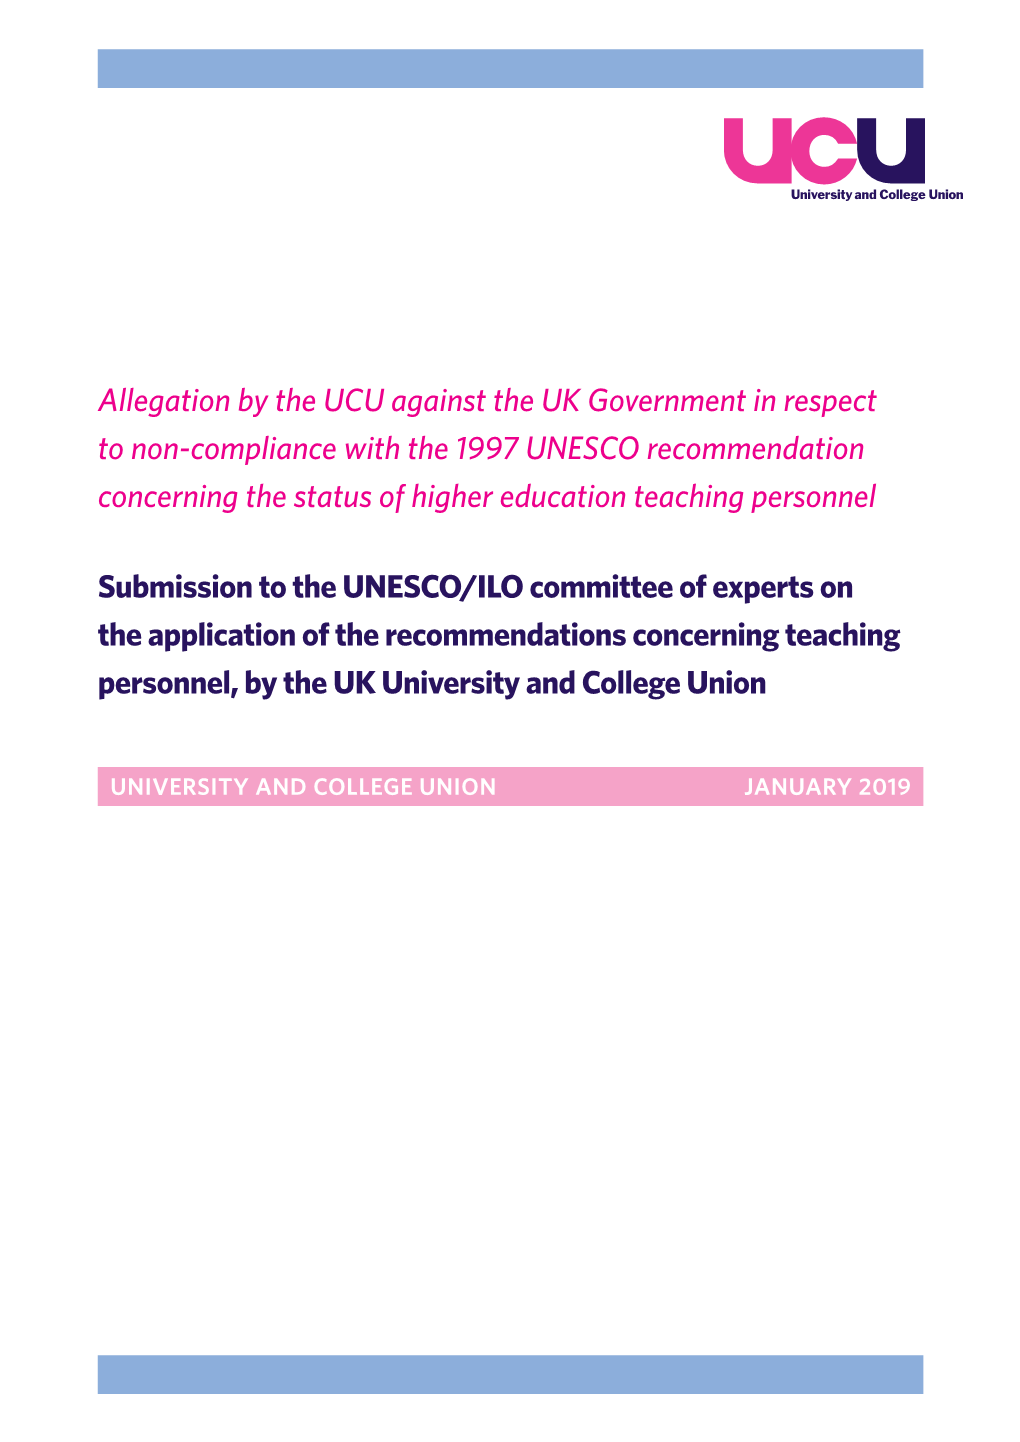 UCU Submission to UNESCO/ILO Concerning Teaching Personnel